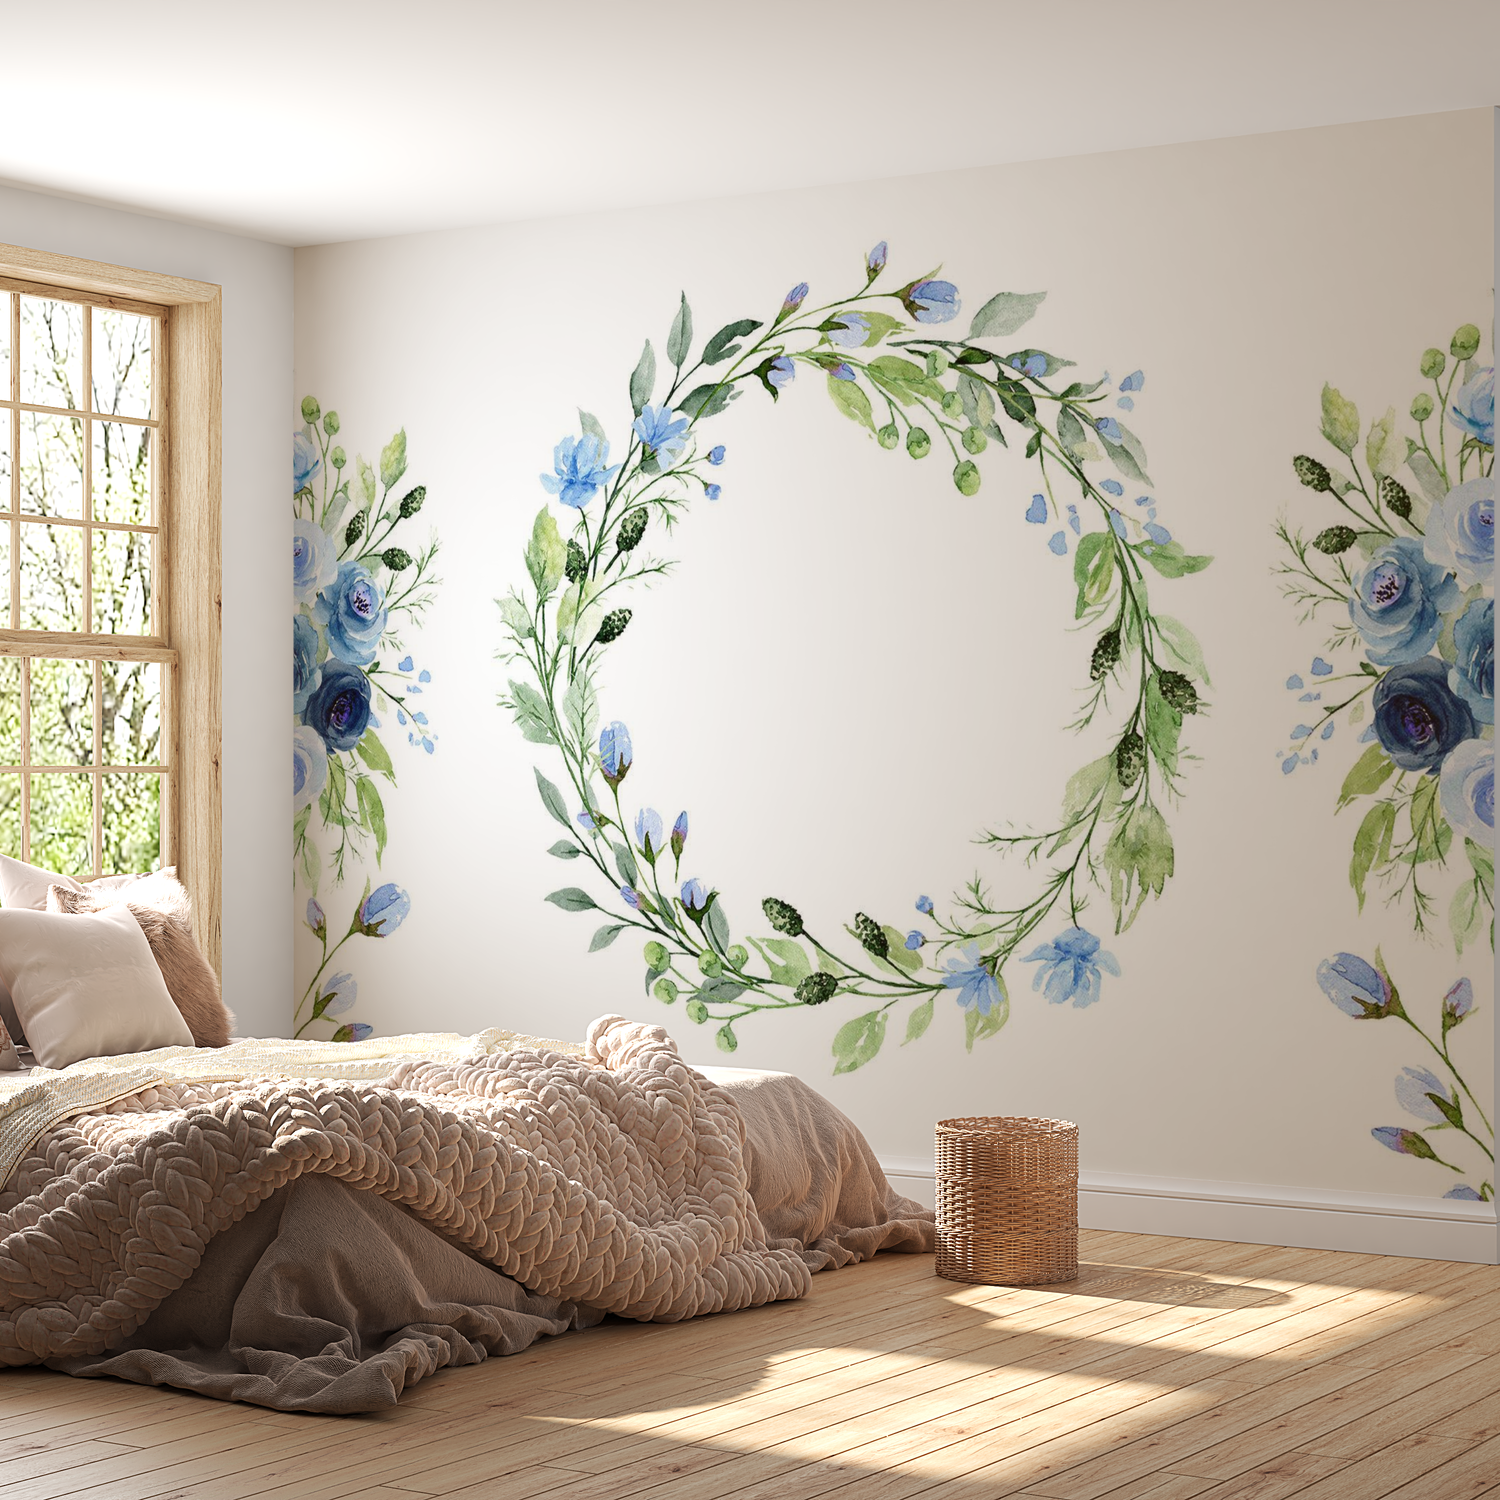 Peel & Stick Floral Wall Mural - Romantic Wreath - Removable Wallpaper 38"Wx27"H